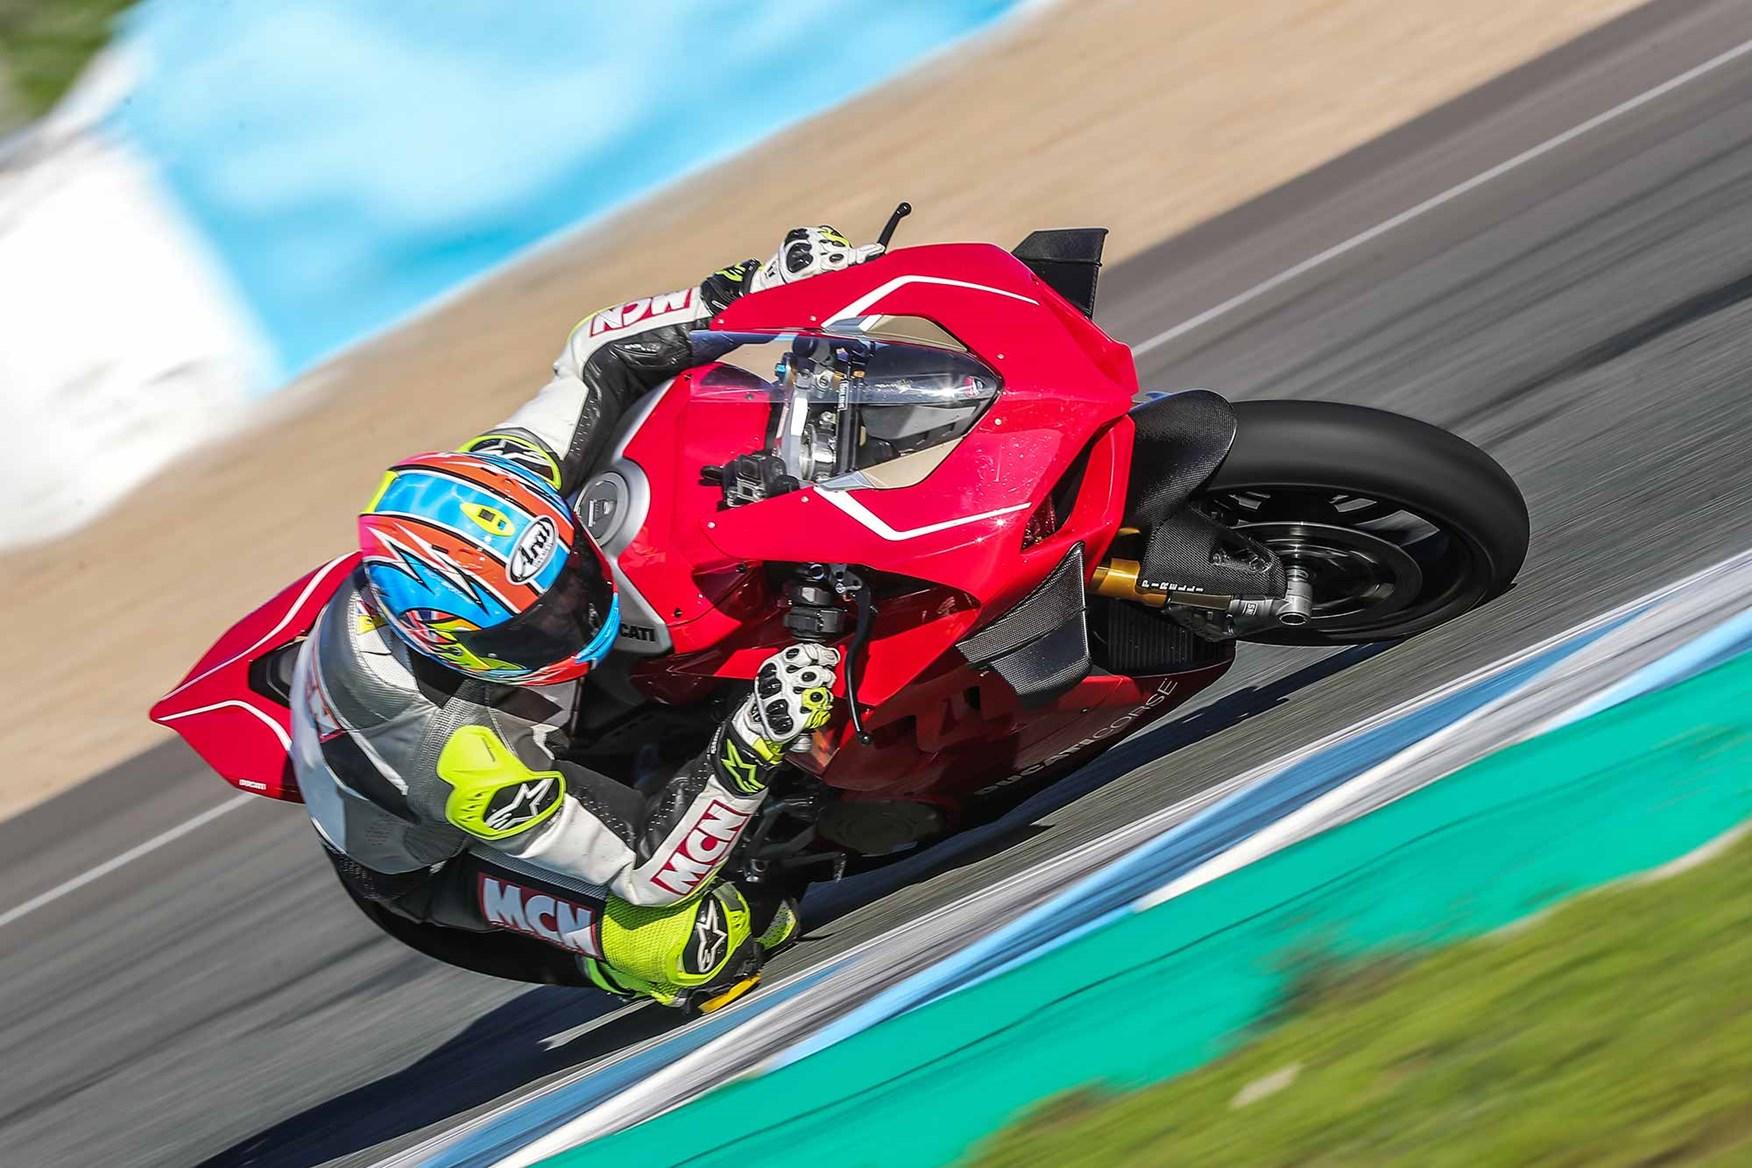 DUCATI PANIGALE V4R (2019 On) Review